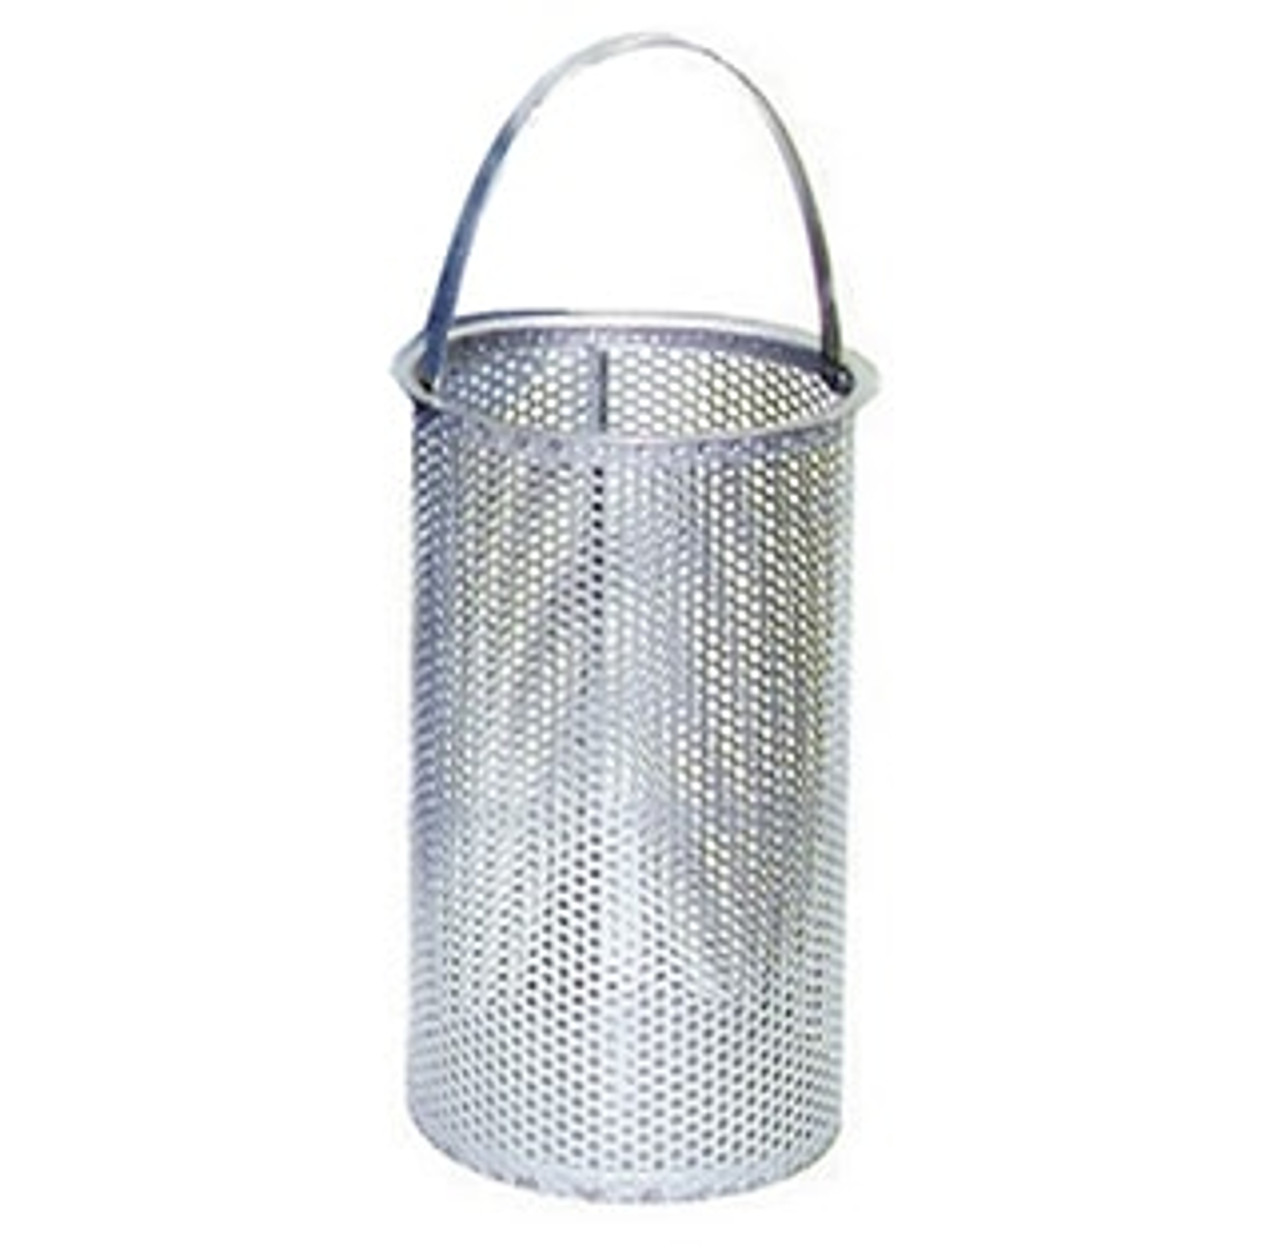 1/2" Perforated Replacement Basket for 8" Eaton Model 30R Strainer